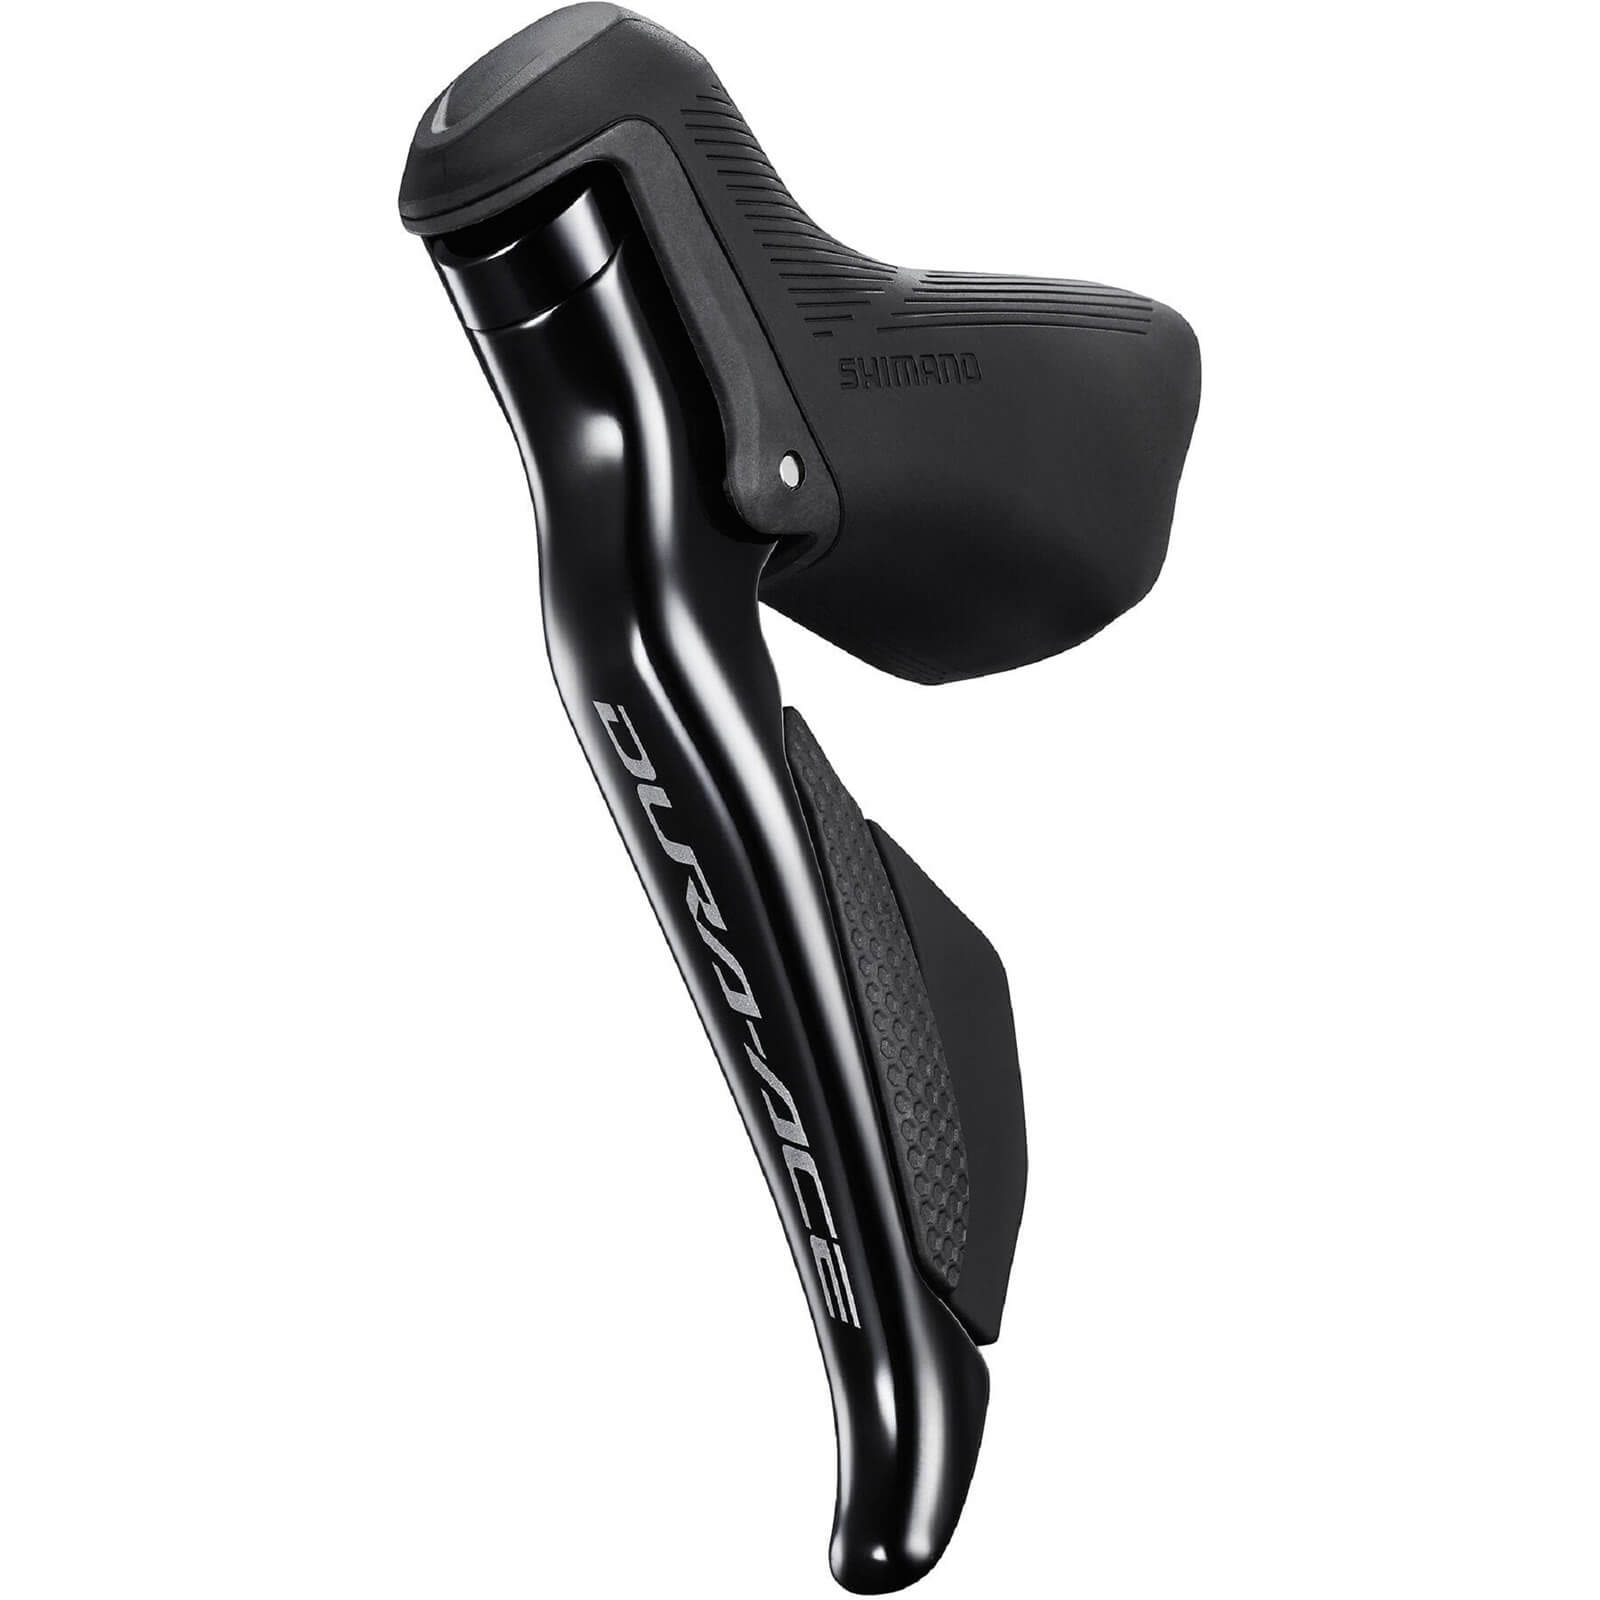 Shimano Dura-Ace ST-R9250 Gear Shift Lever - Left Hand